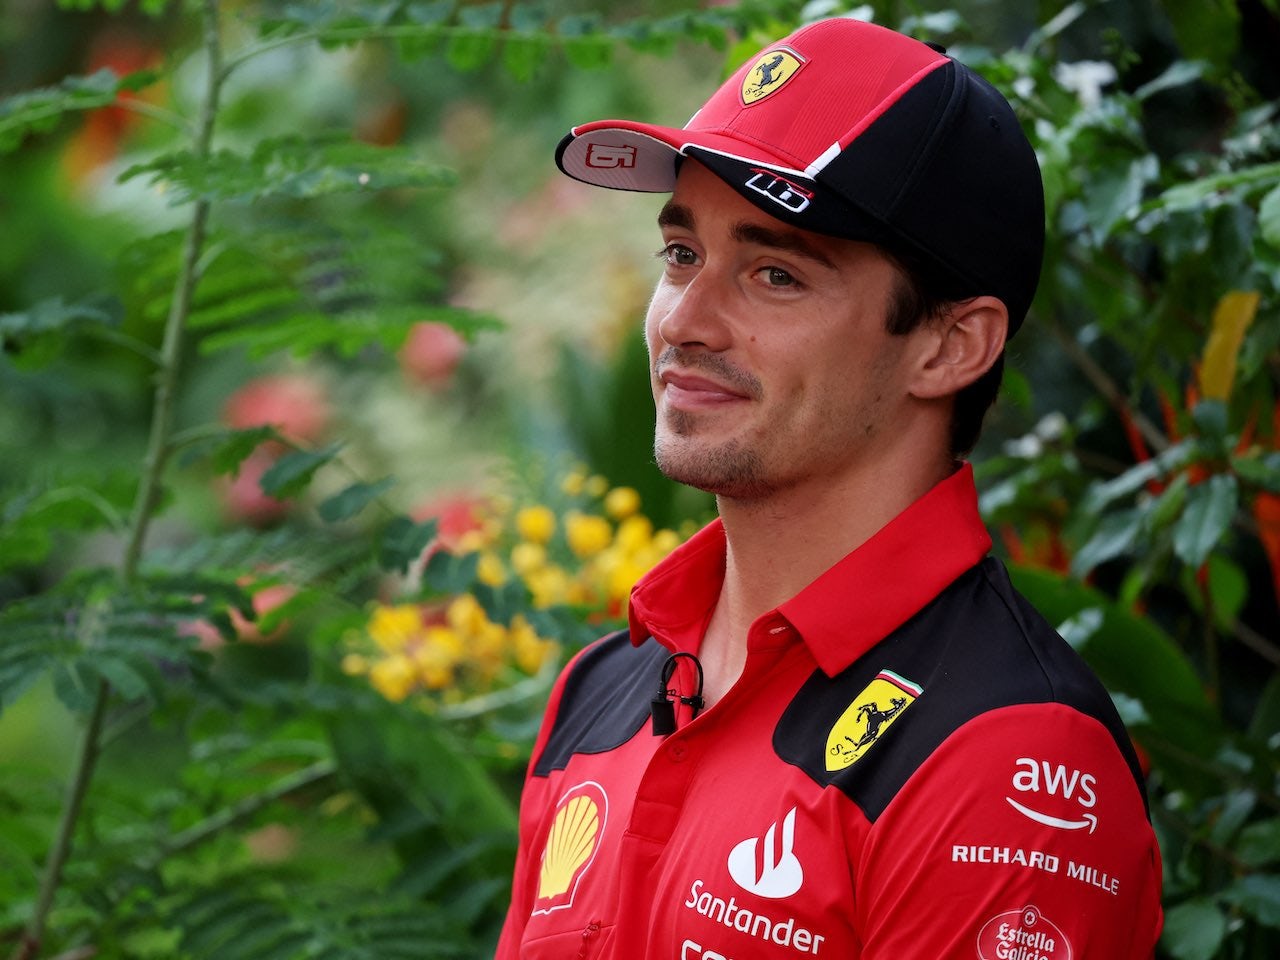 Most important thing is fast 2024 car - Leclerc